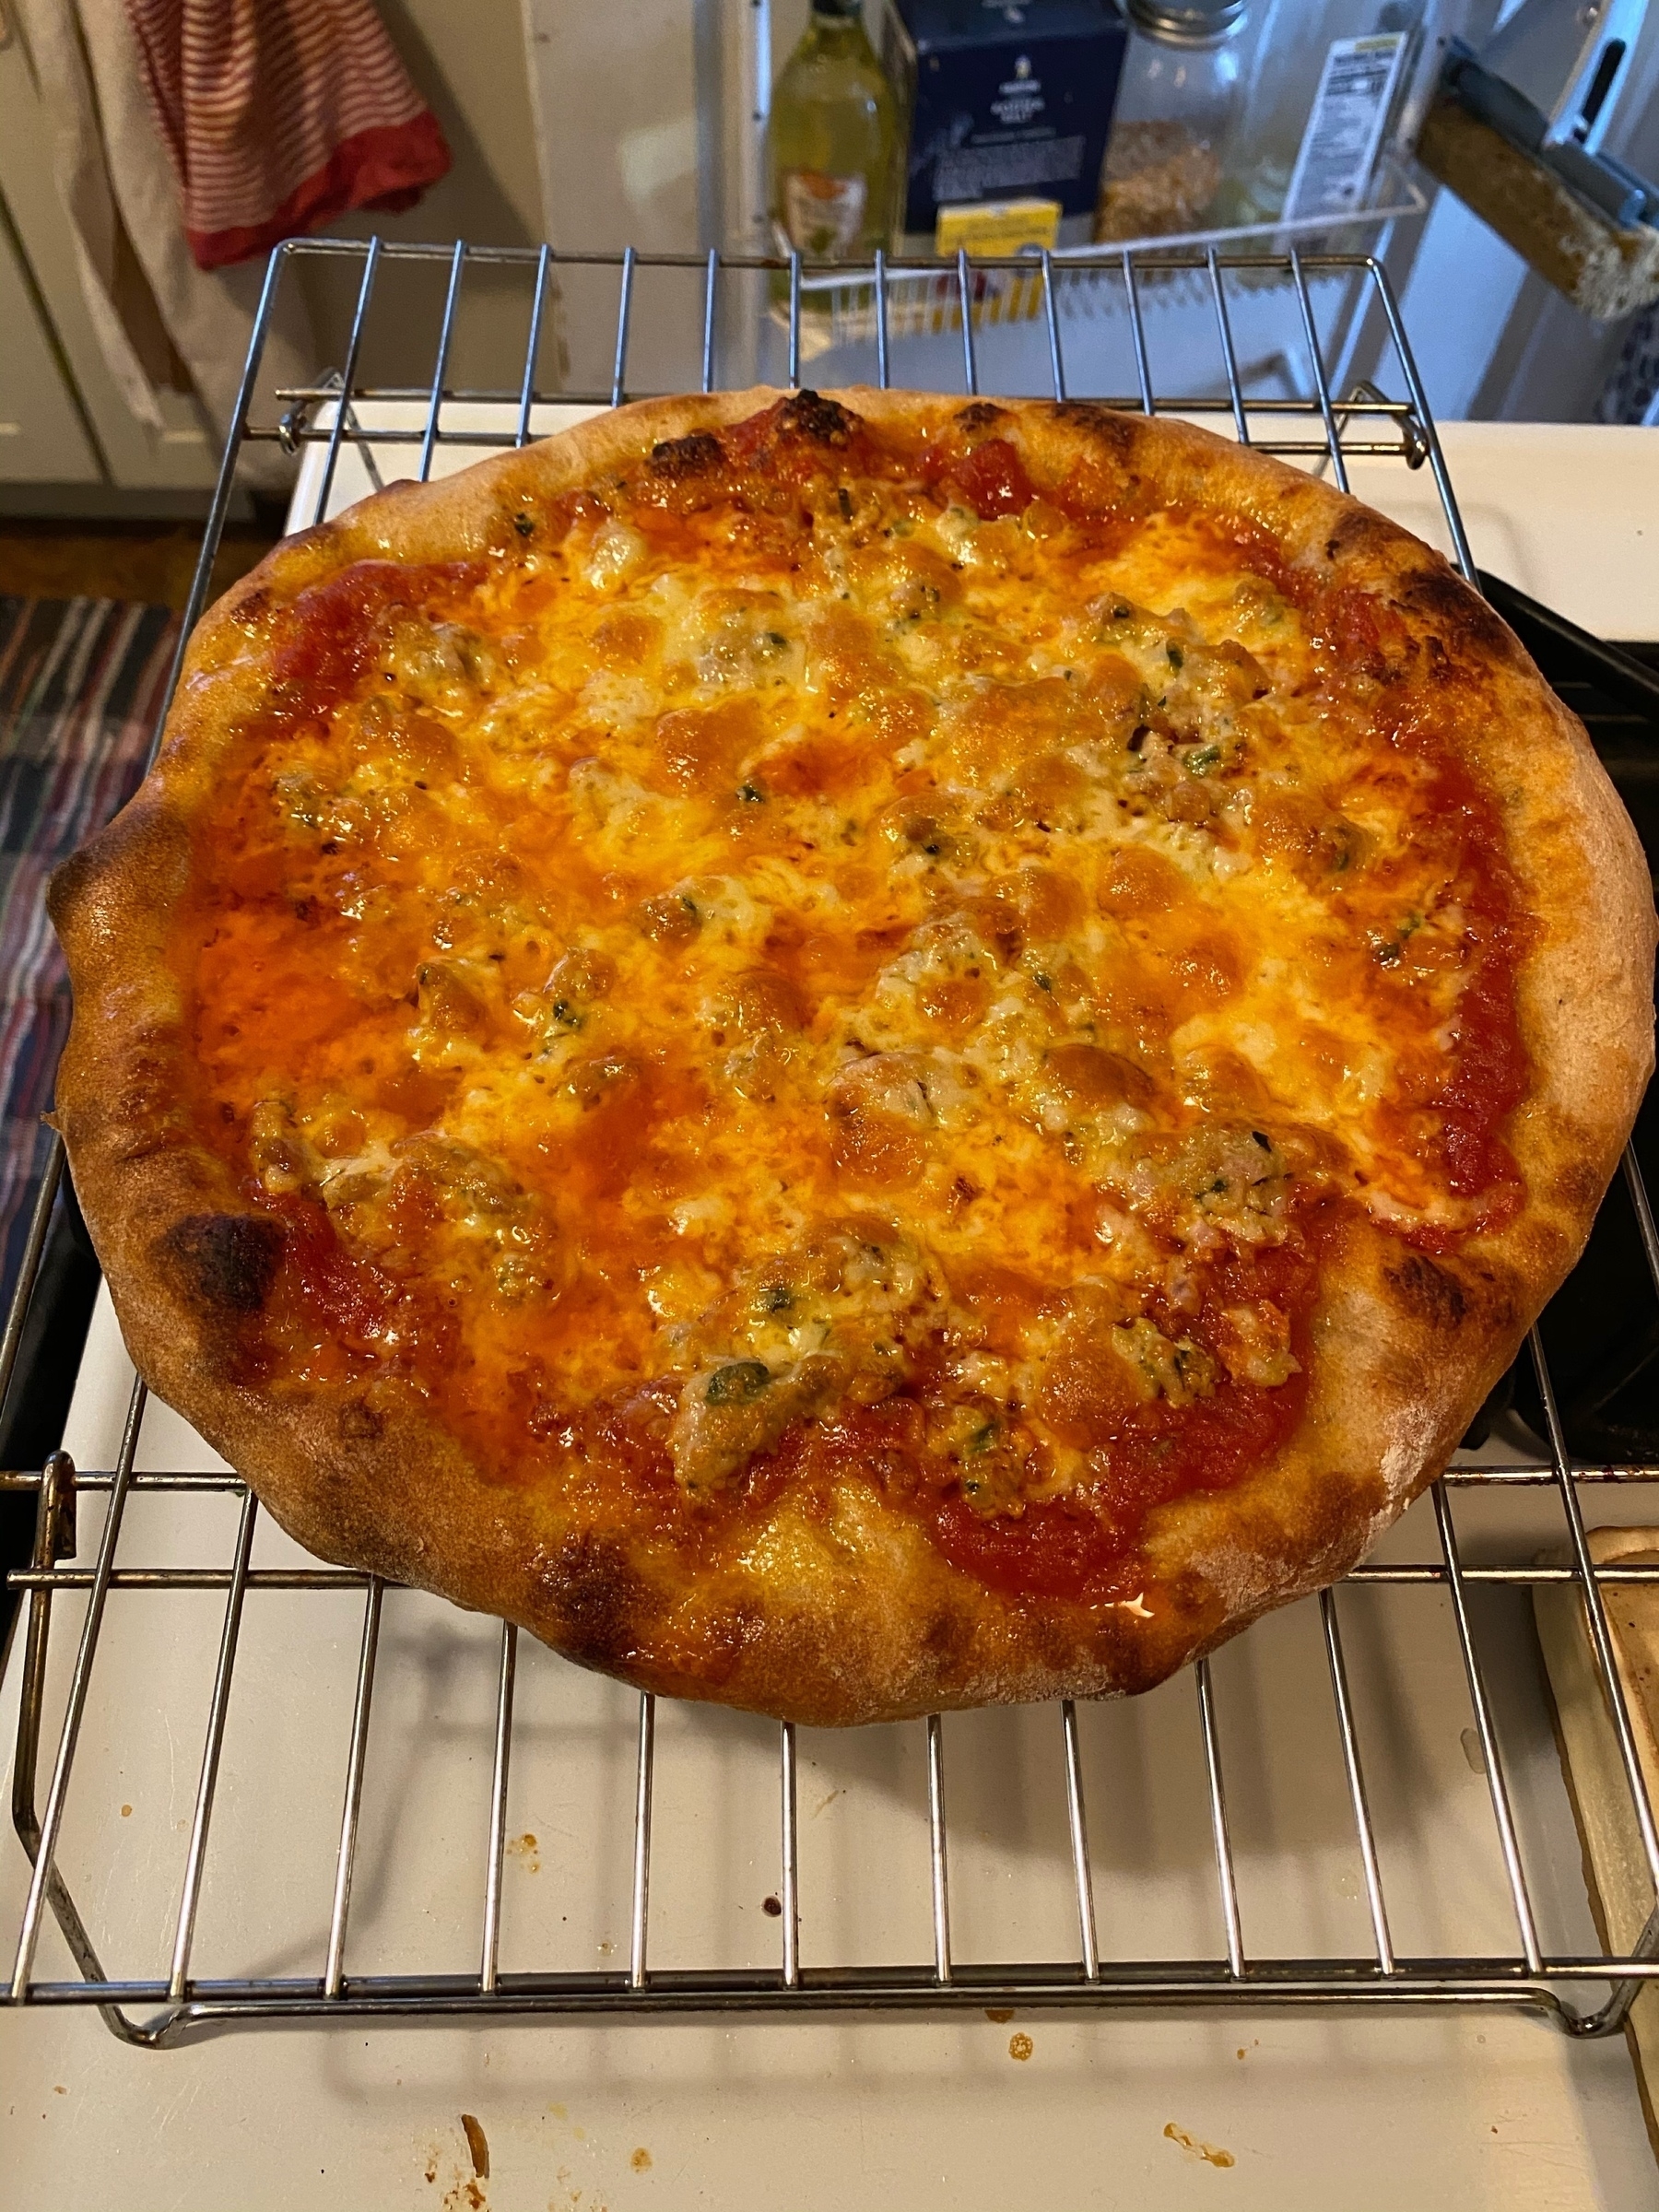 Another small pizza on a cooling rack.